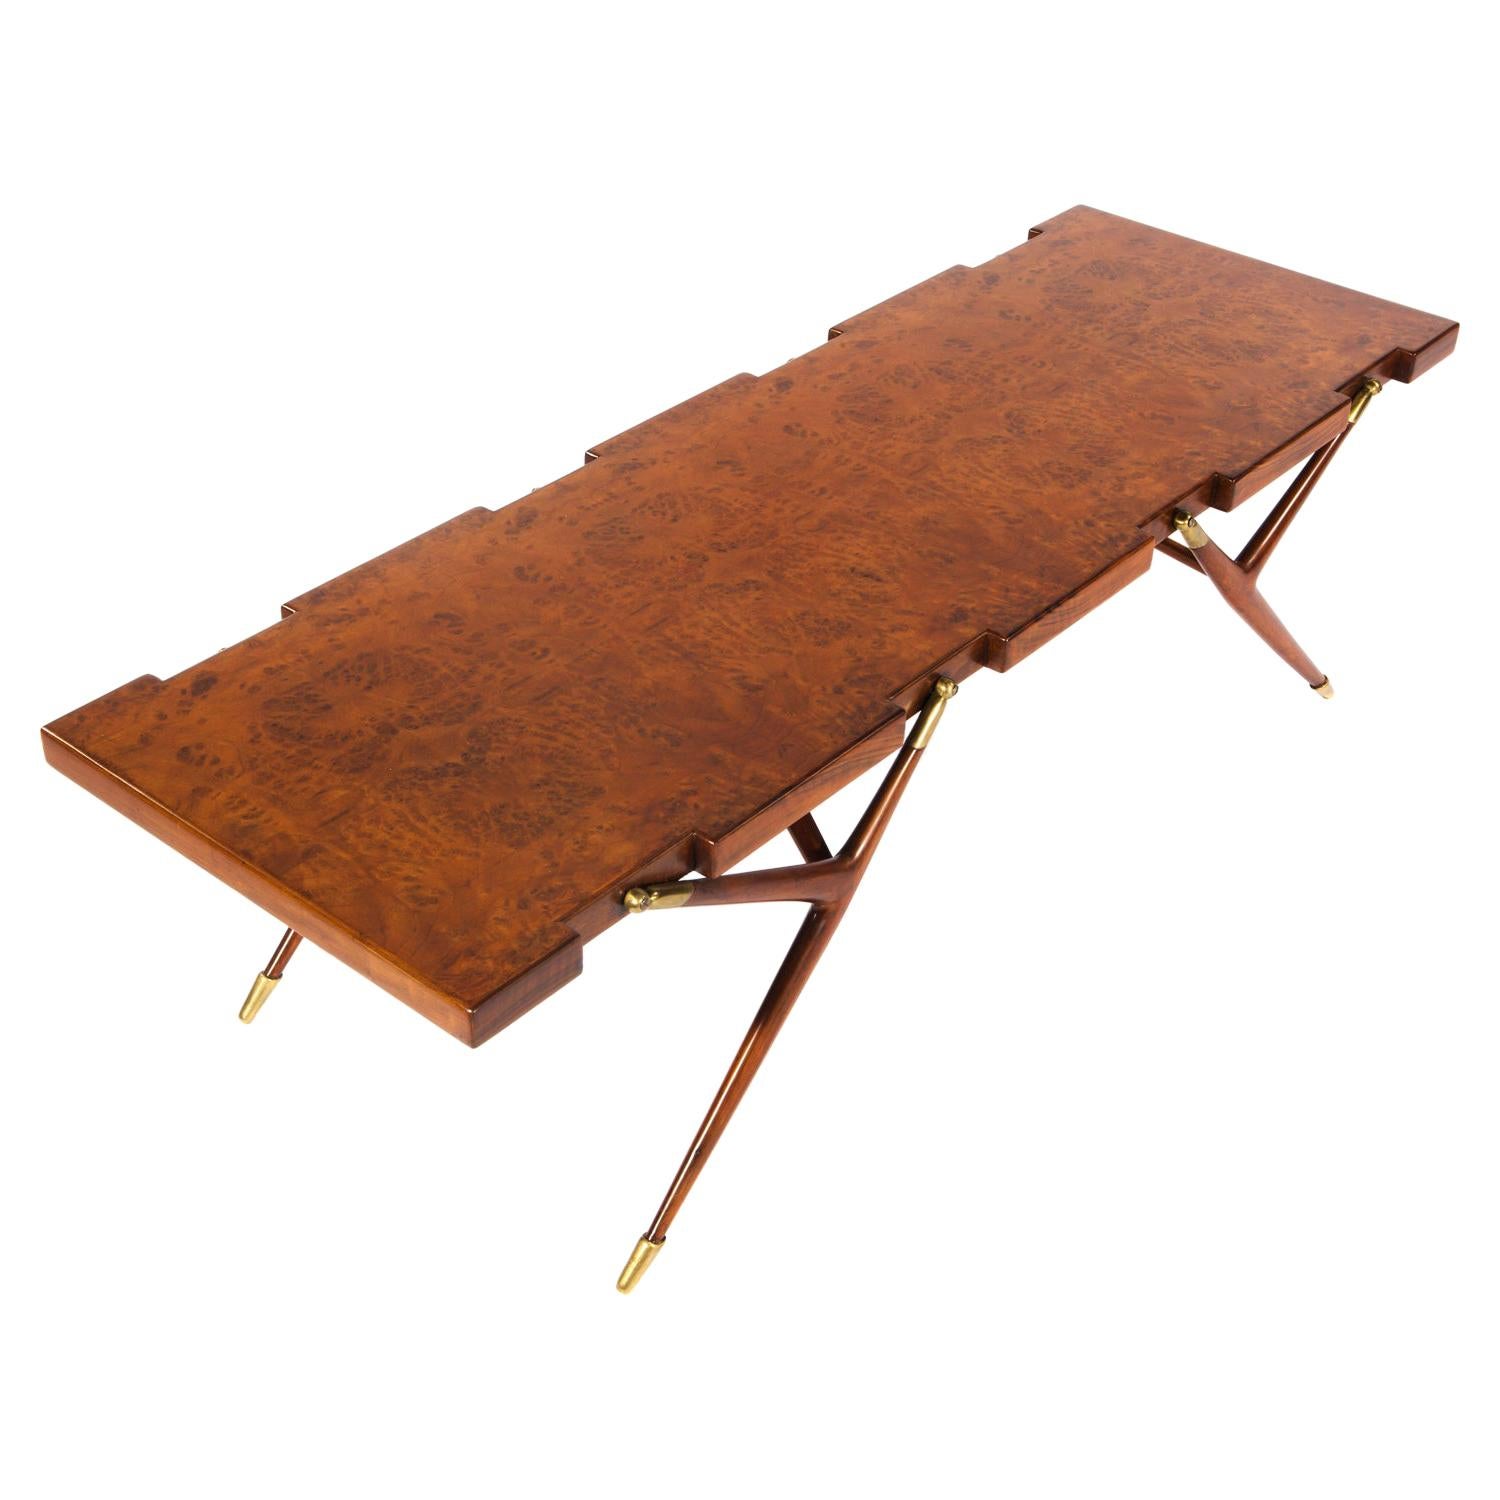 Ico Parisi Sculptural Coffee Table in Burled Walnut with Brass Fittings, 1950s